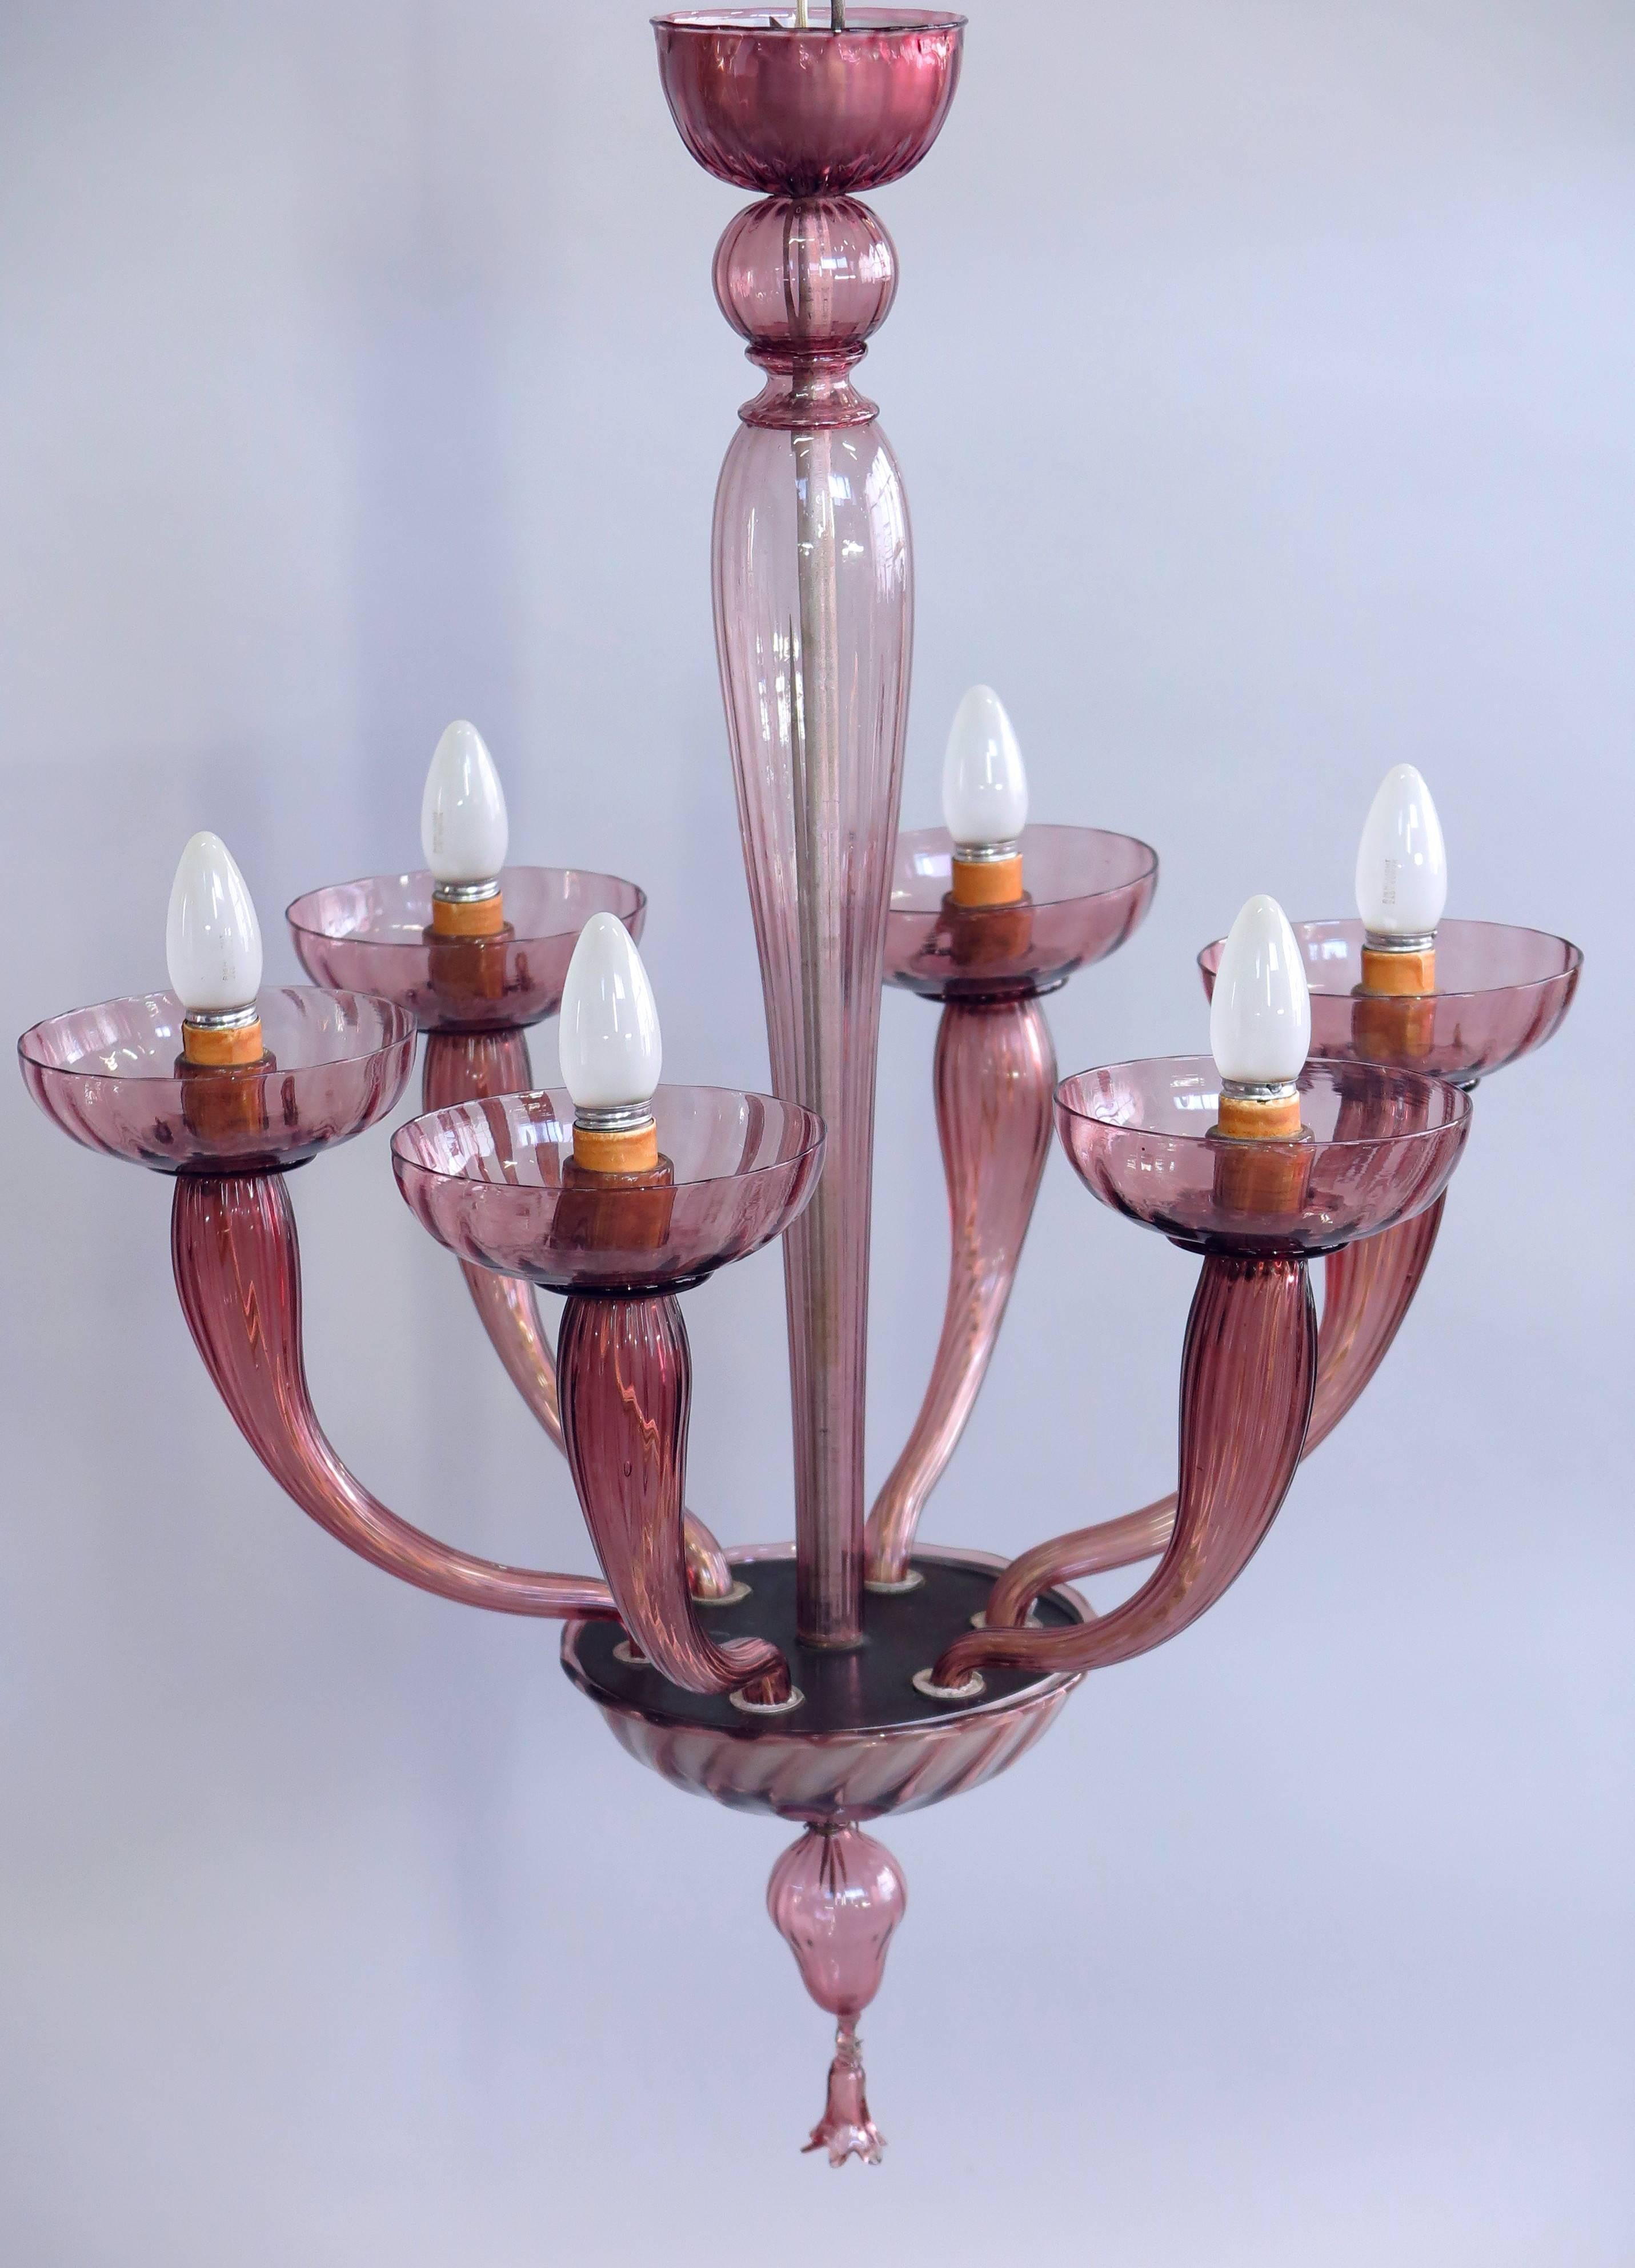 Attributed to Napoleone Martinuzzi, this six fixture chandelier was manufactured in 1930 by Venini, marked 